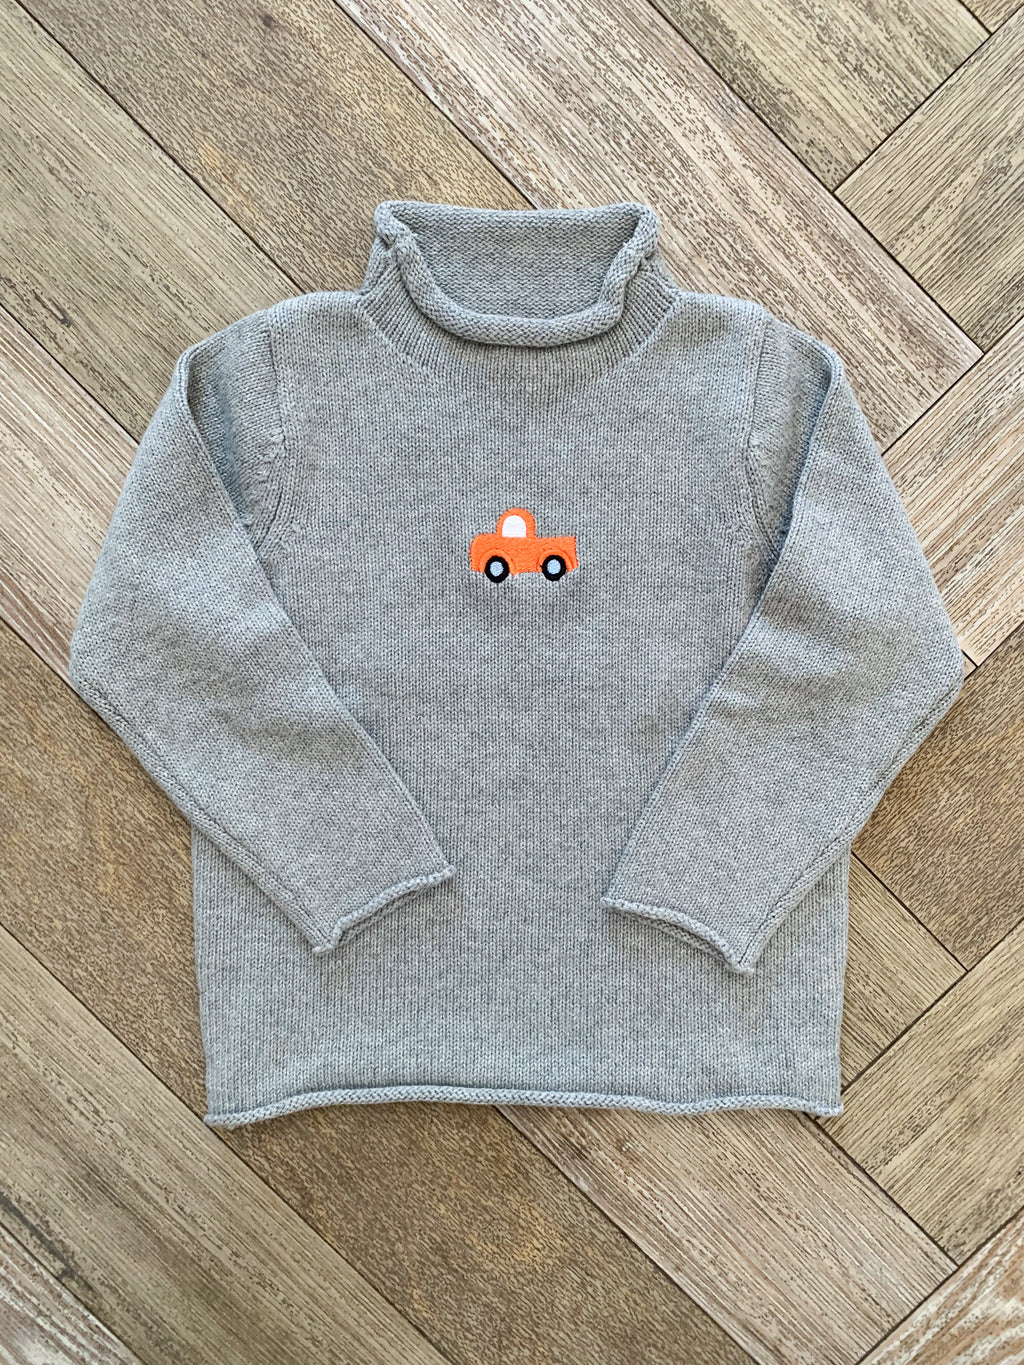 A Soft Idea Roll Neck Sweater in Grey with Truck